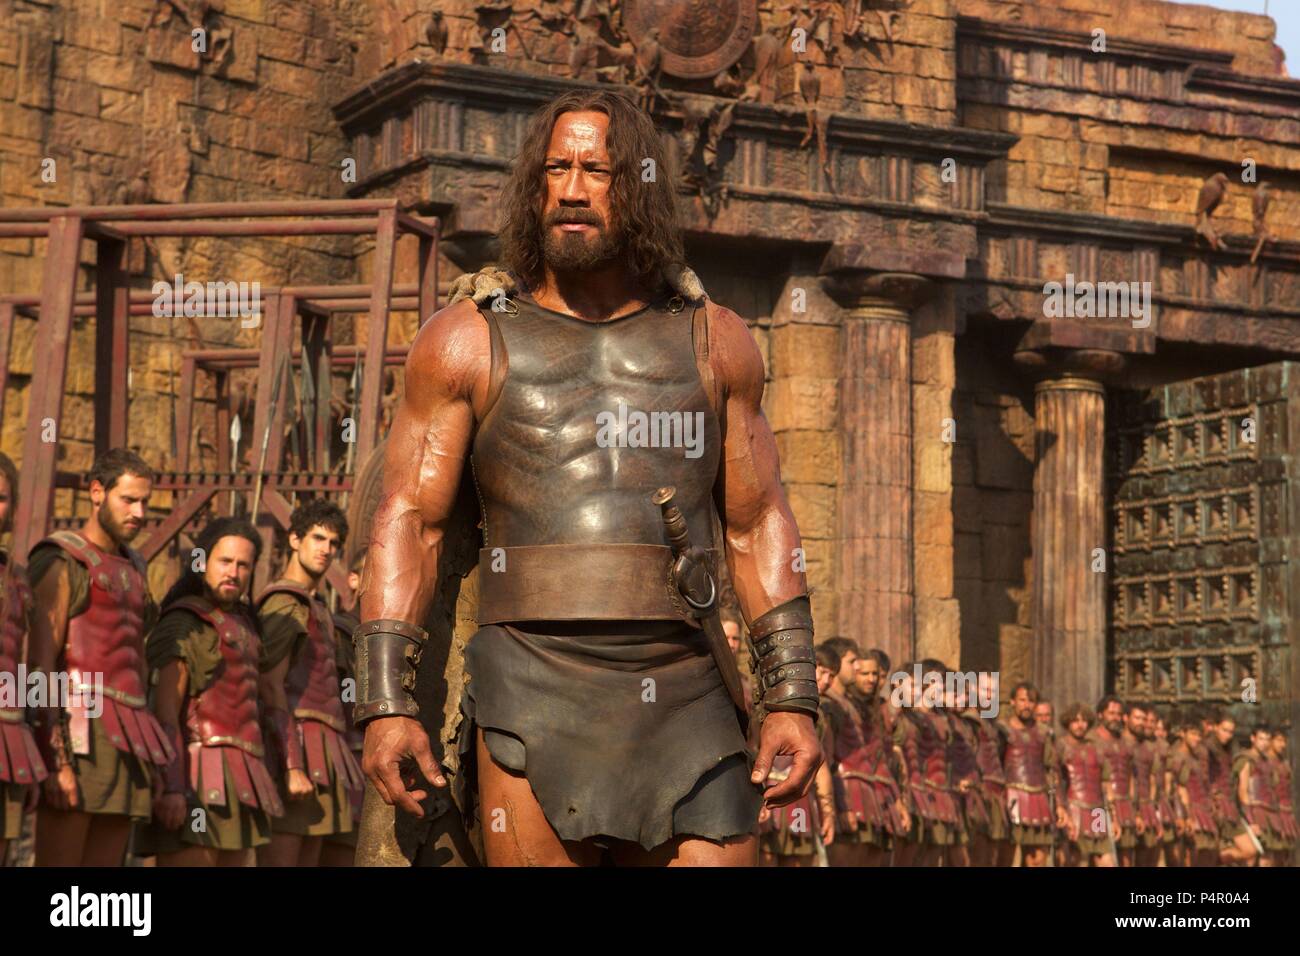 Hercules Film High Resolution Stock Photography and Images - Alamy